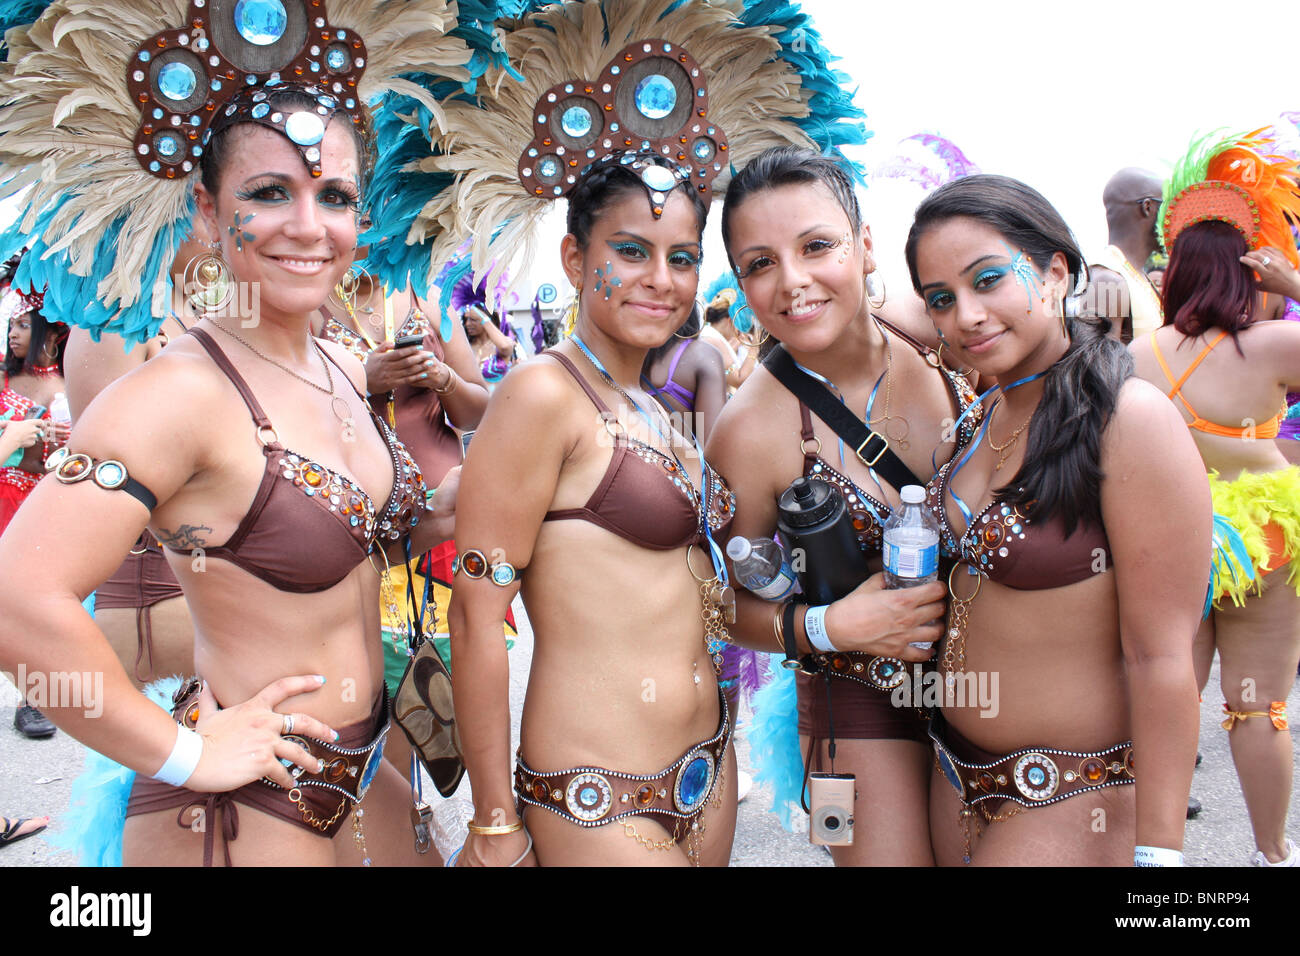 The 43rd (2010) Toronto Caribbean Carnival (Caribana) is the largest Caribbean festival in North America. Stock Photo